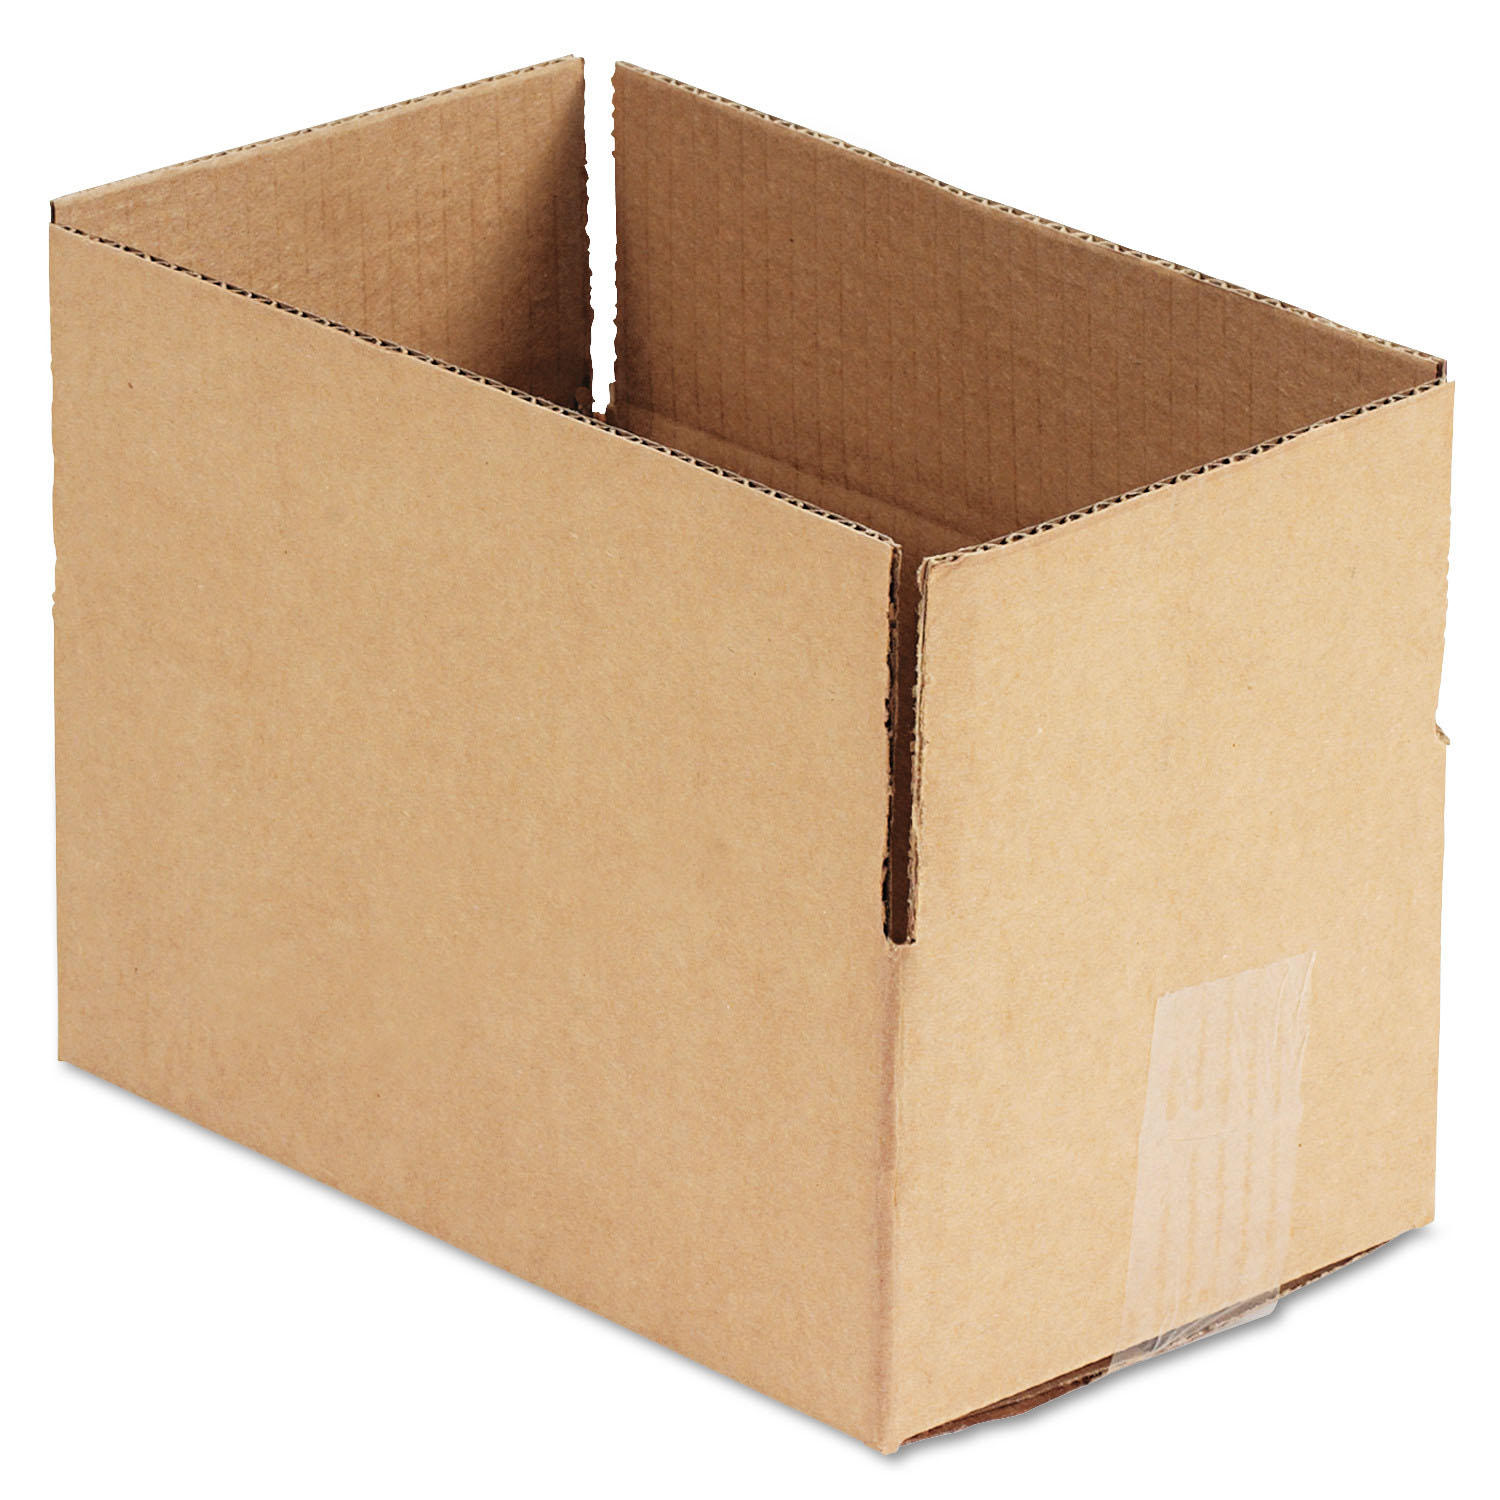 General Supply Brown Corrugated - Fixed-Depth Shipping Boxes, 10l x 6w x 4h, 25/Bundle